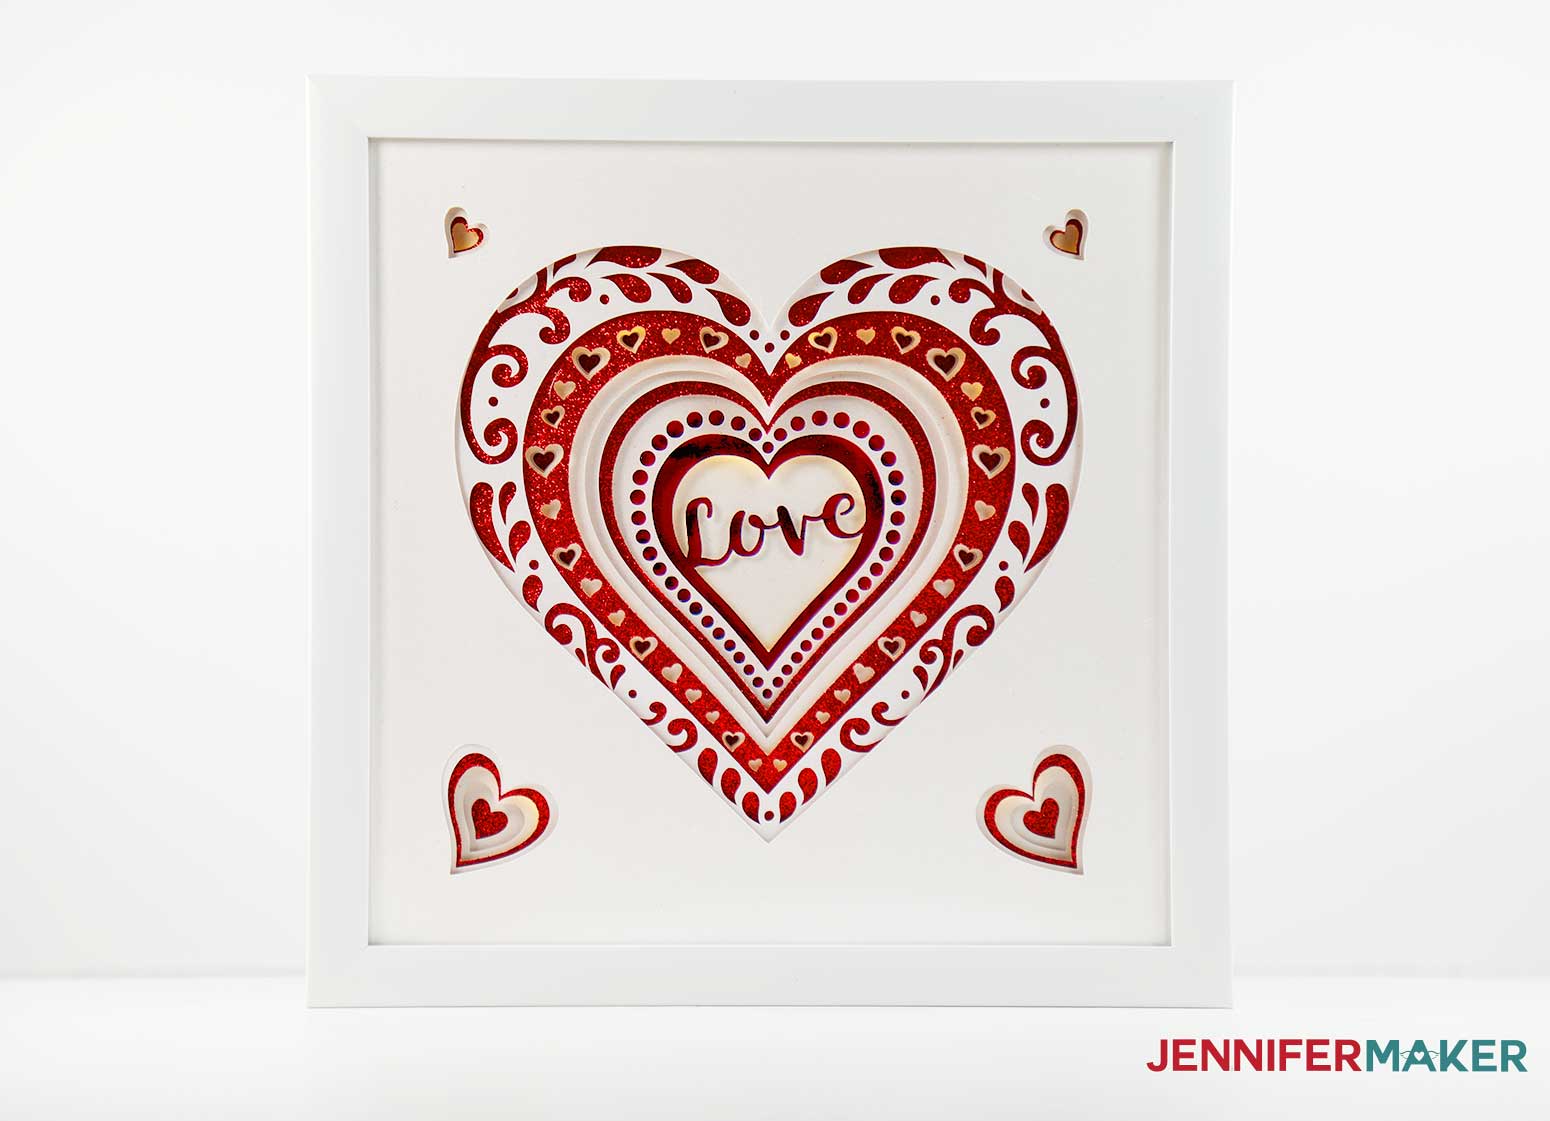 Heart layered design with "Love" background